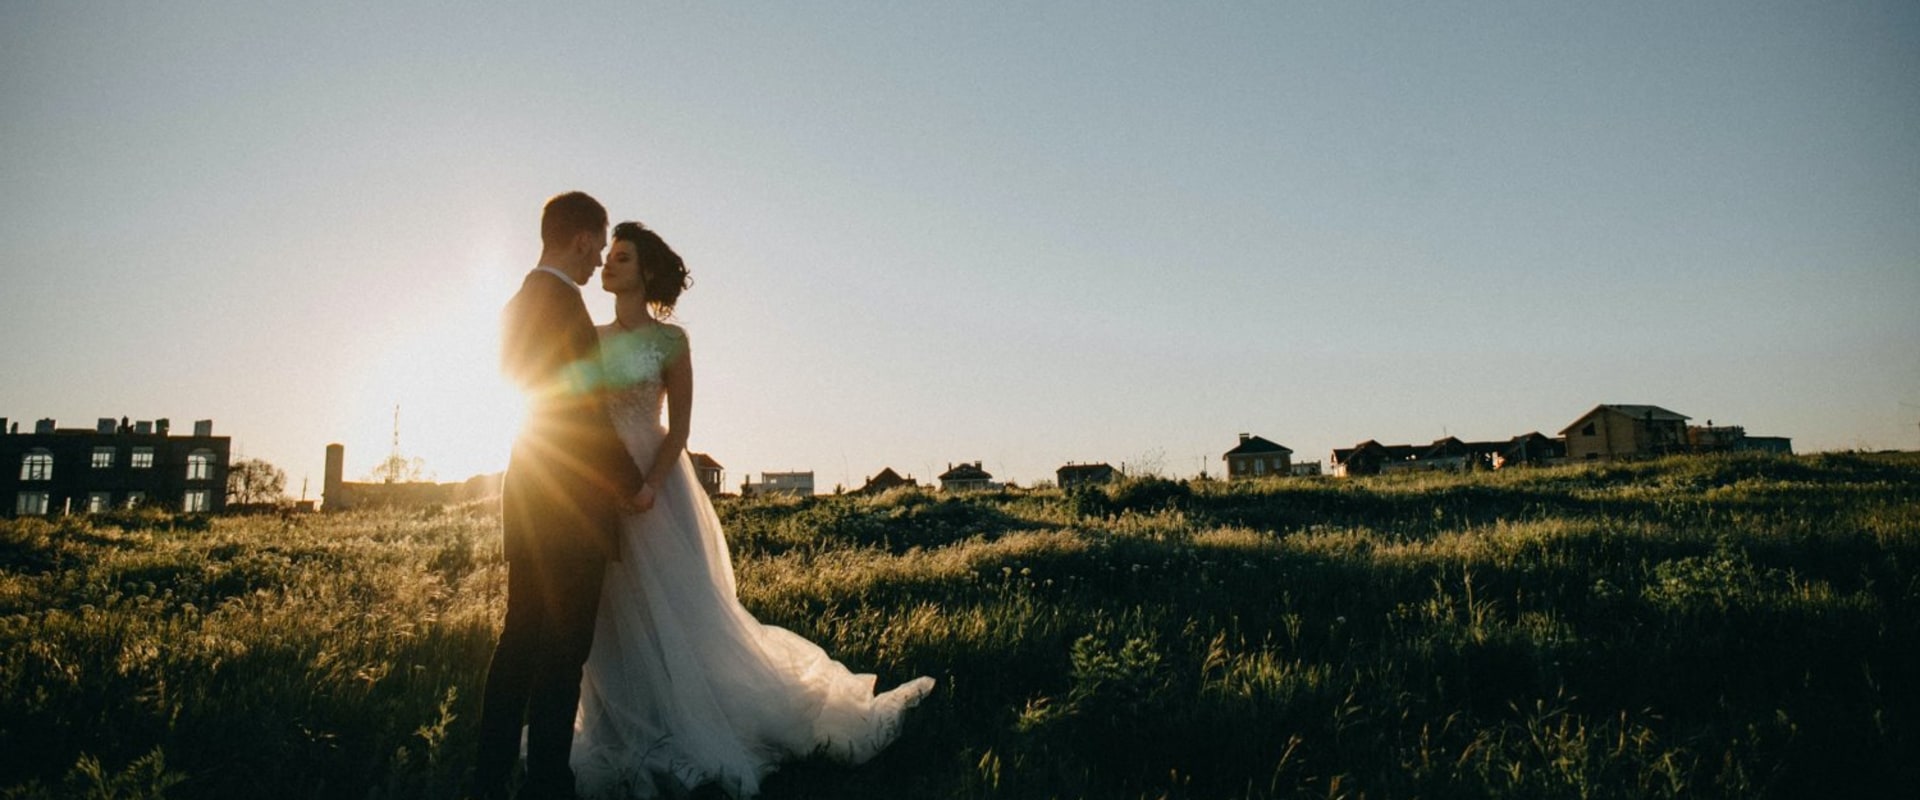 The Best Ways for Wedding Photographers to Share Photos